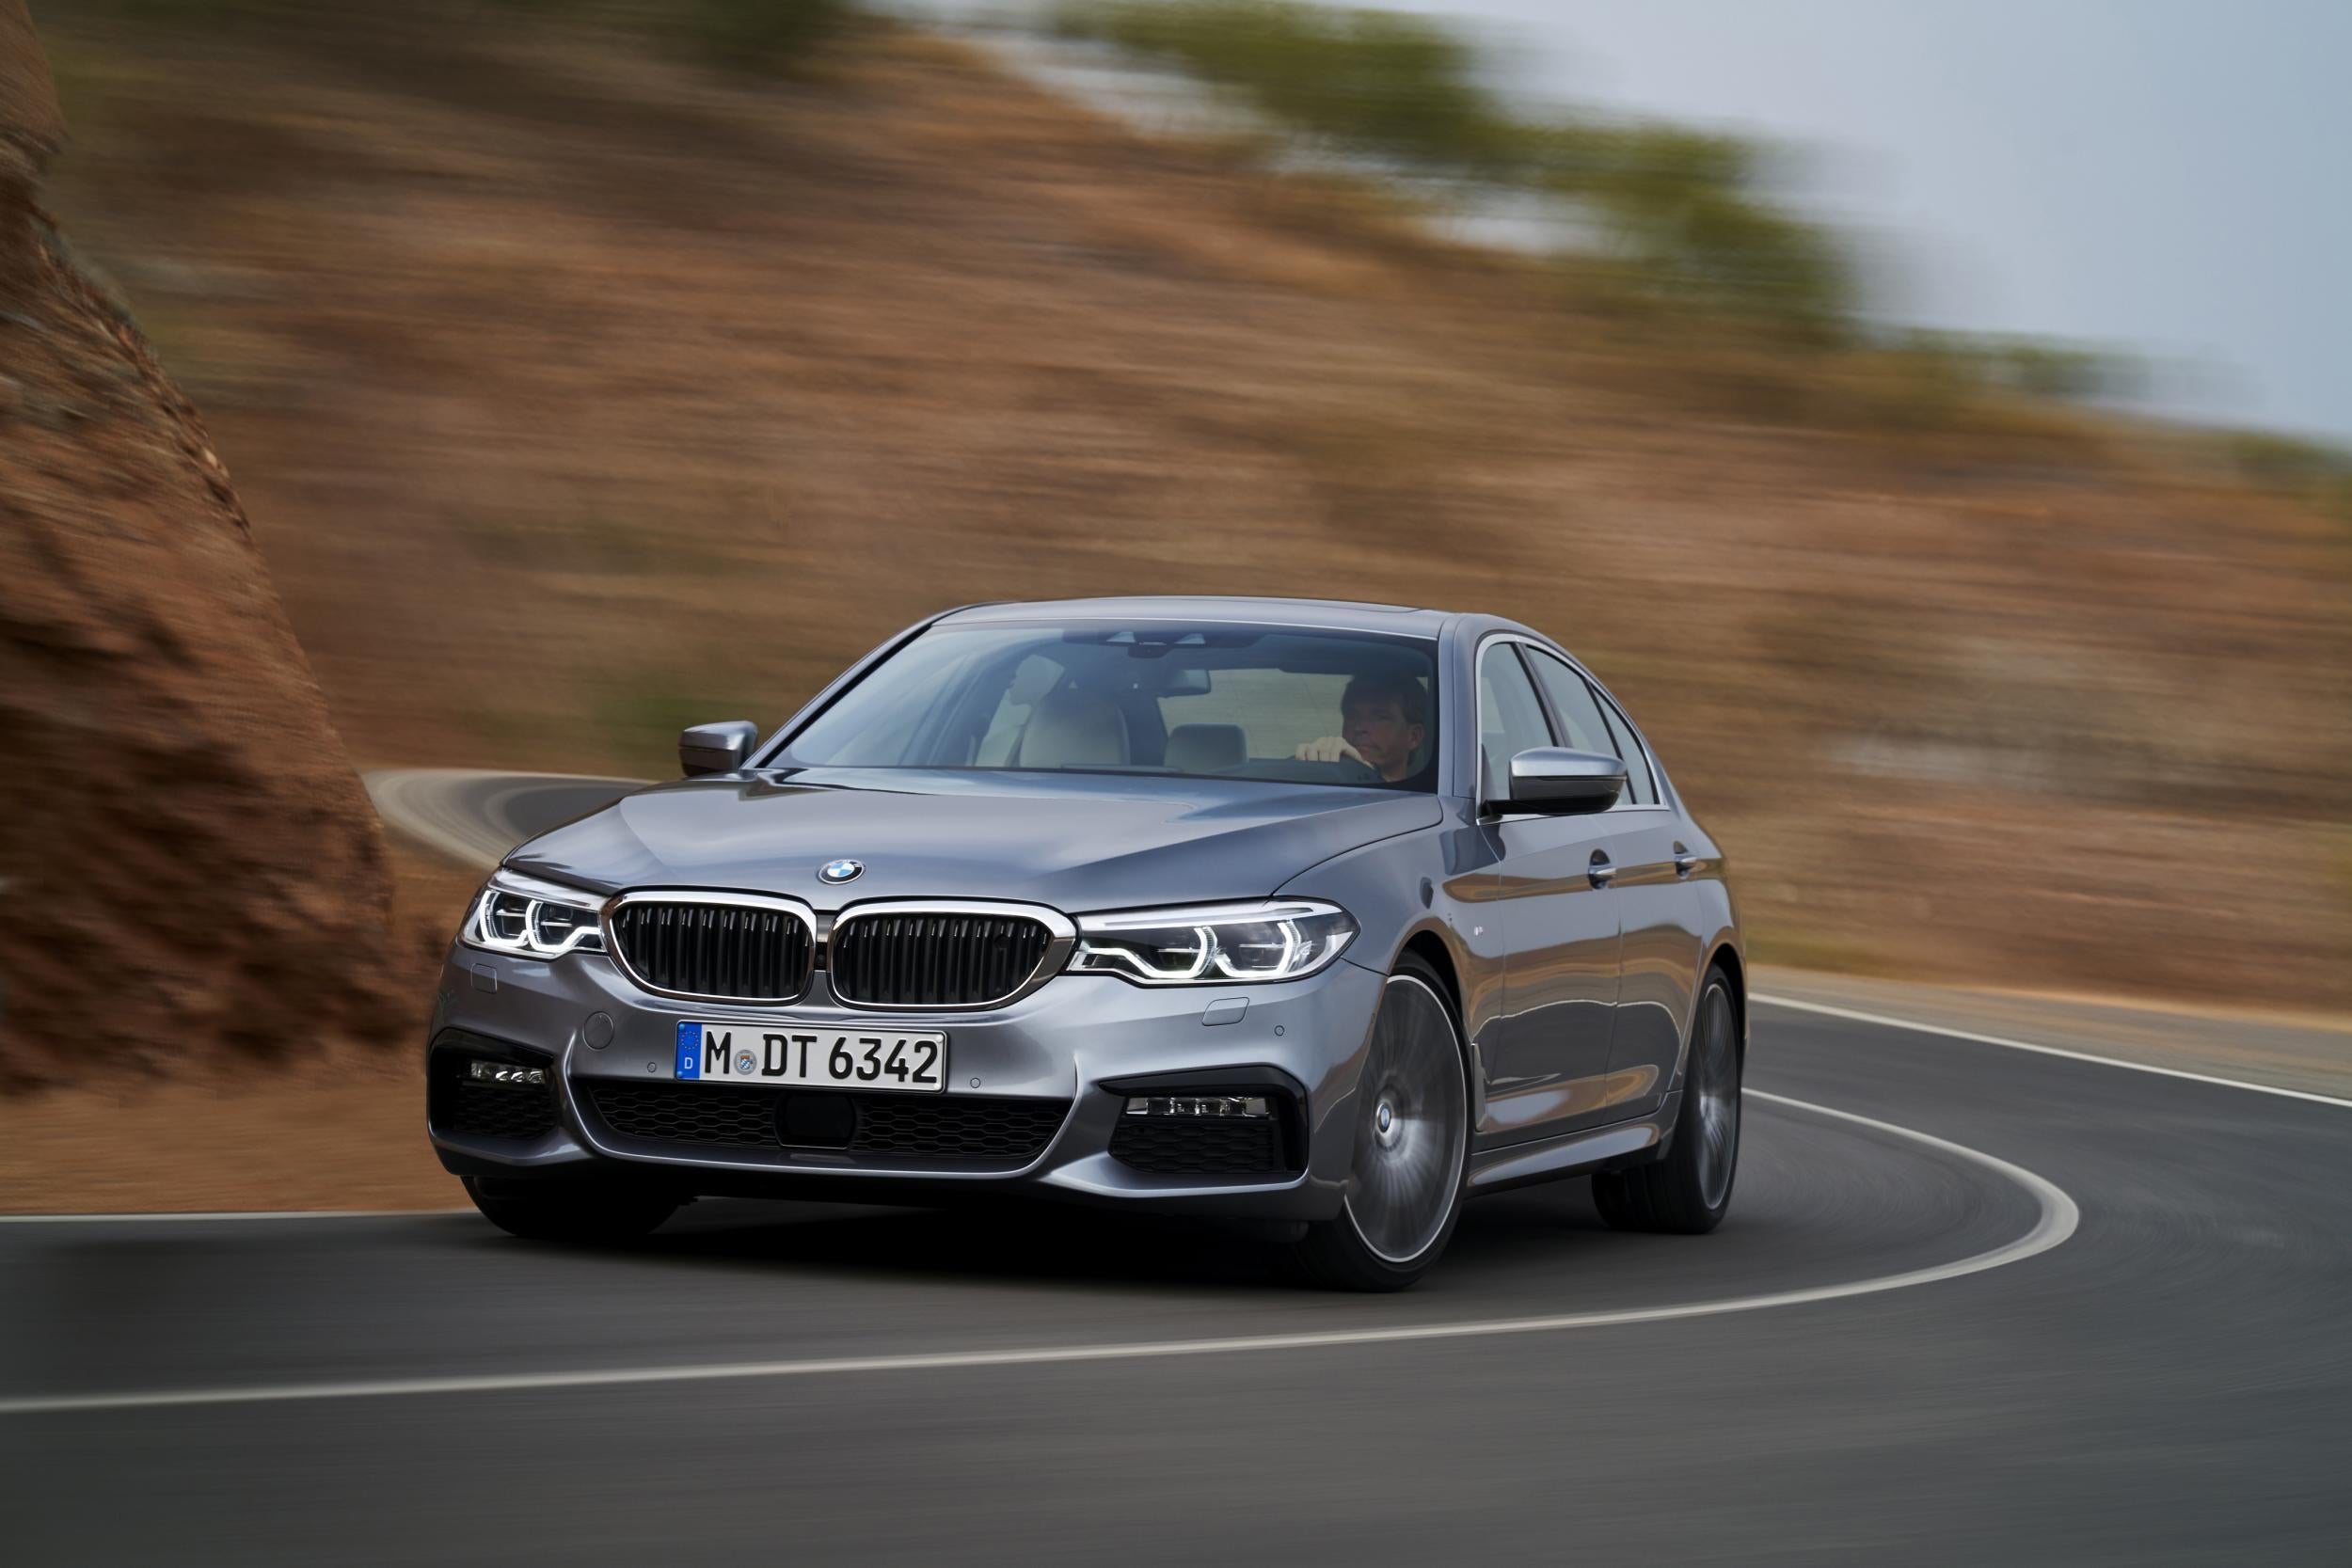 Corner-hugging: the new BMW 5 Series offers adaptable cruise control, a lane-recognition system and self-parking